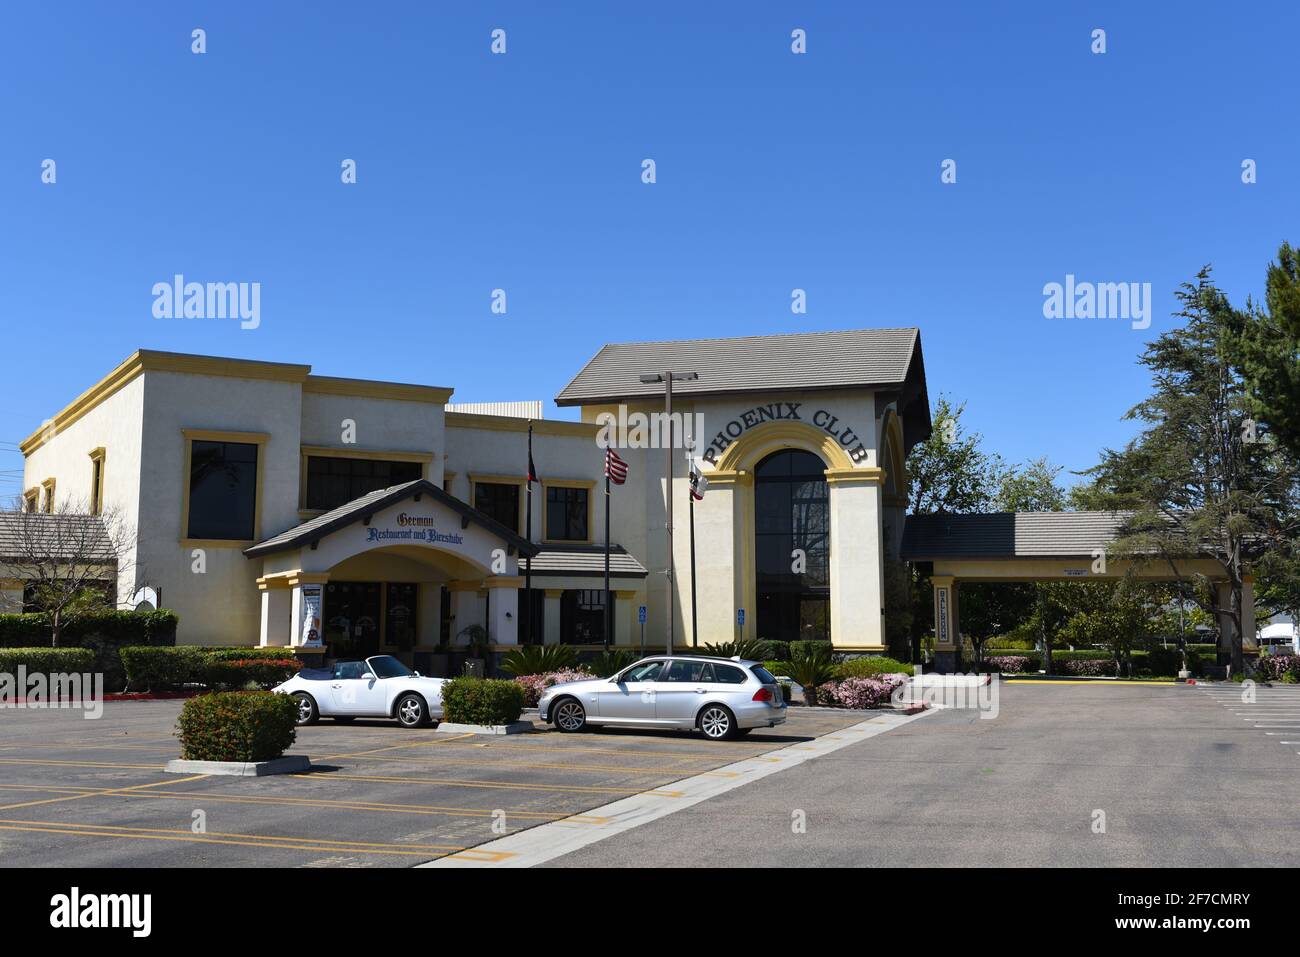 ANAHEIM, CALIFORNIA - 31 MAR 2021: The Phoenix Club, a German restaurant and dance hall featuring authentic Bavarian food and imported beers. Stock Photo